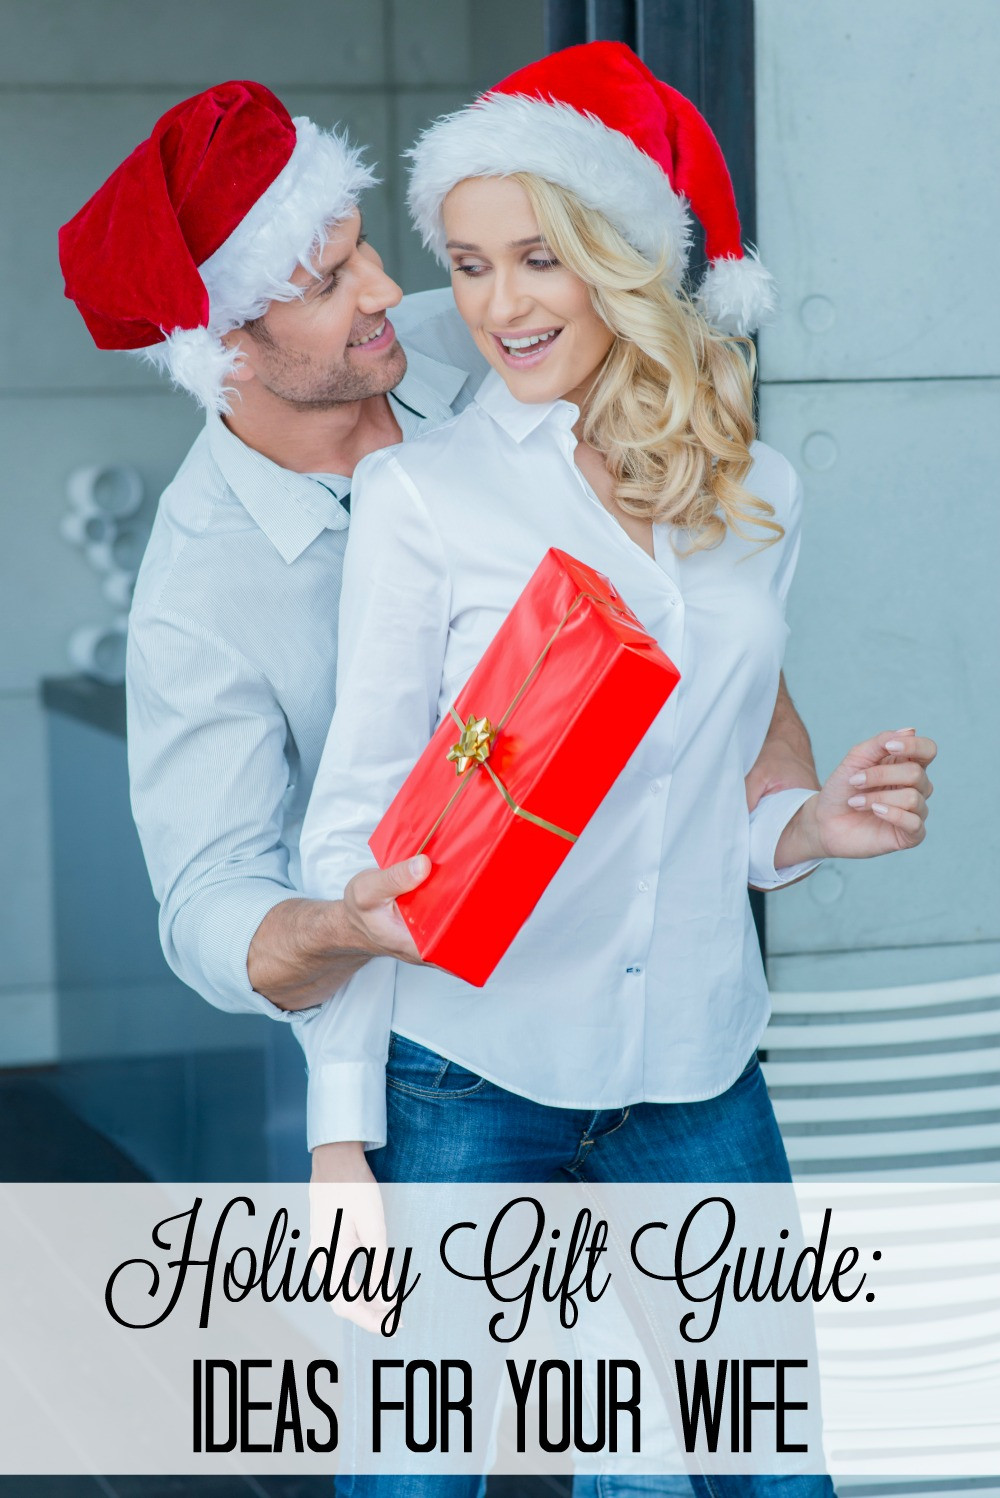 Christmas Gift Ideas For Wife And Mother
 Holiday Gift Guide Ideas for the Wife